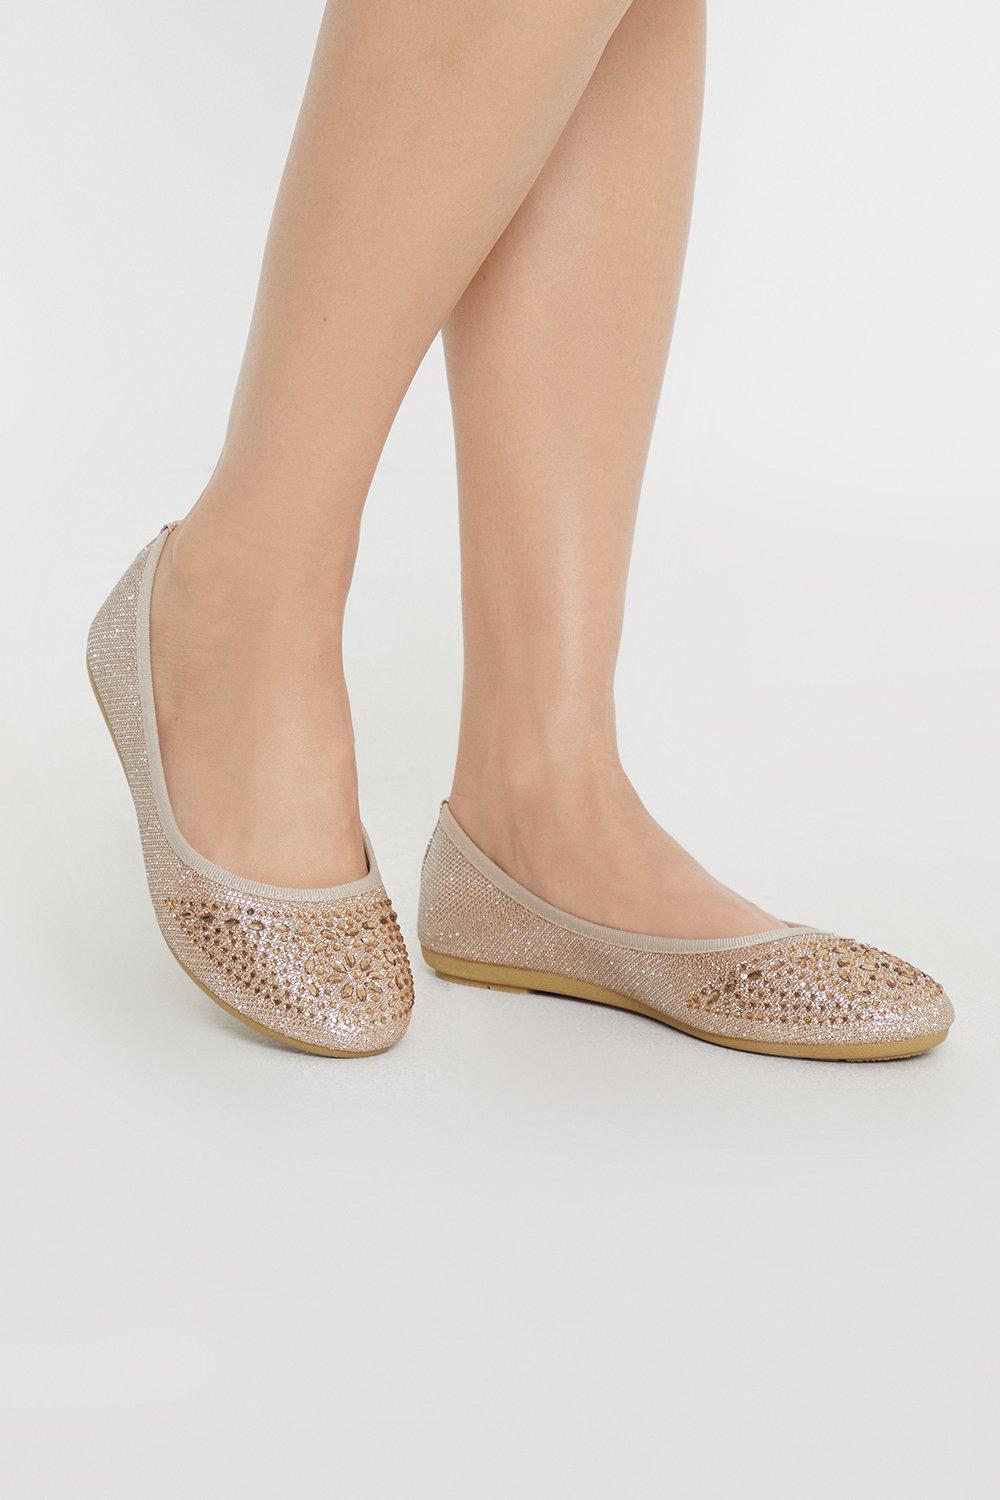 Womens Good For The Sole: Tammy Sparkly Comfort Ballet Flats